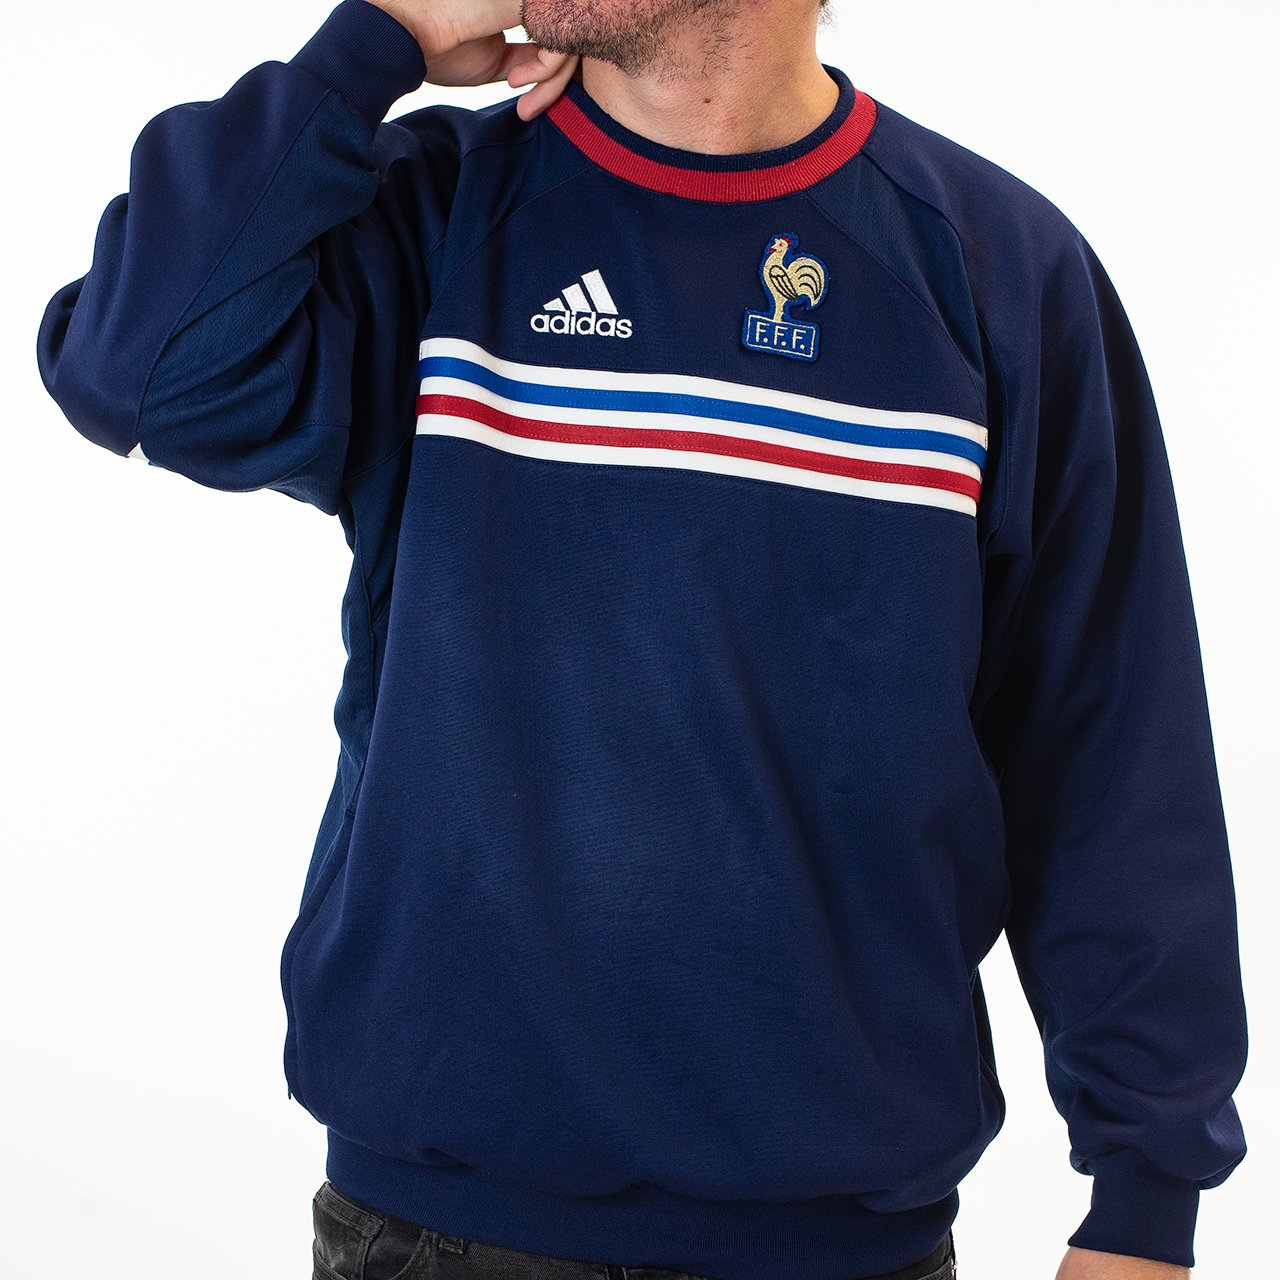 Classic Football Shirts on Twitter: "France 98 Sweat Top by 🇫🇷😍 https://t.co/eX0KE5QHwO" / Twitter